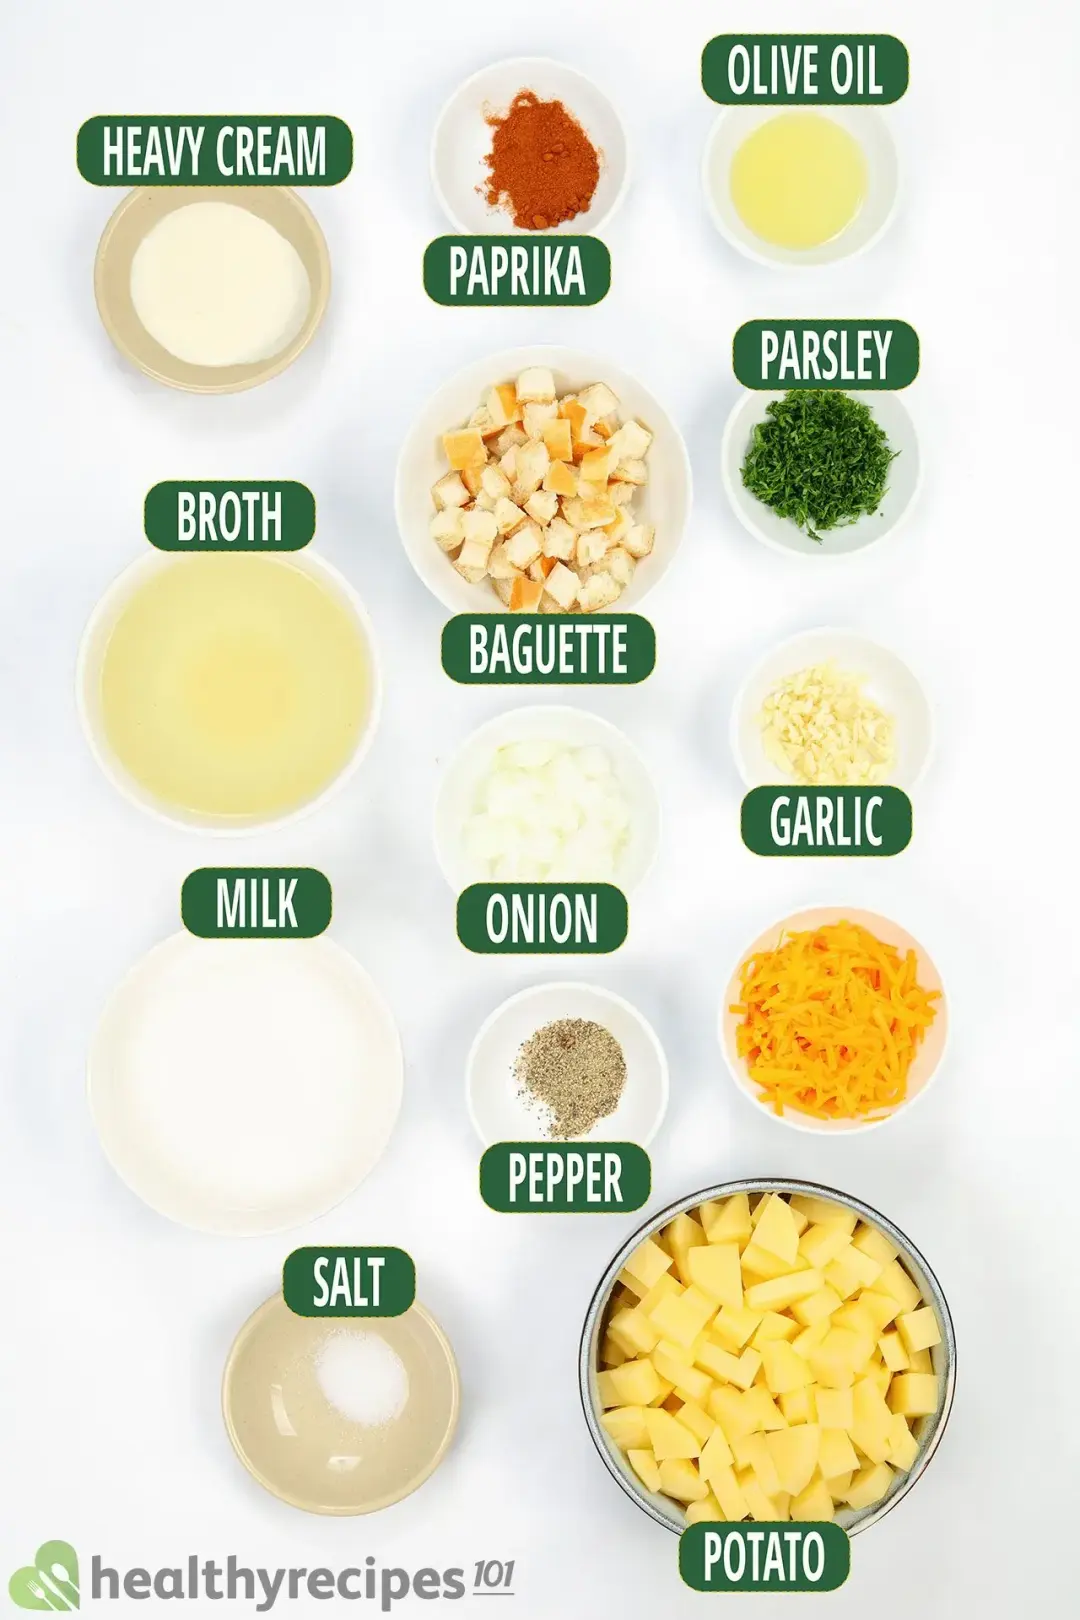 Ingredients for Our Cheesy Potato Soup Recipe